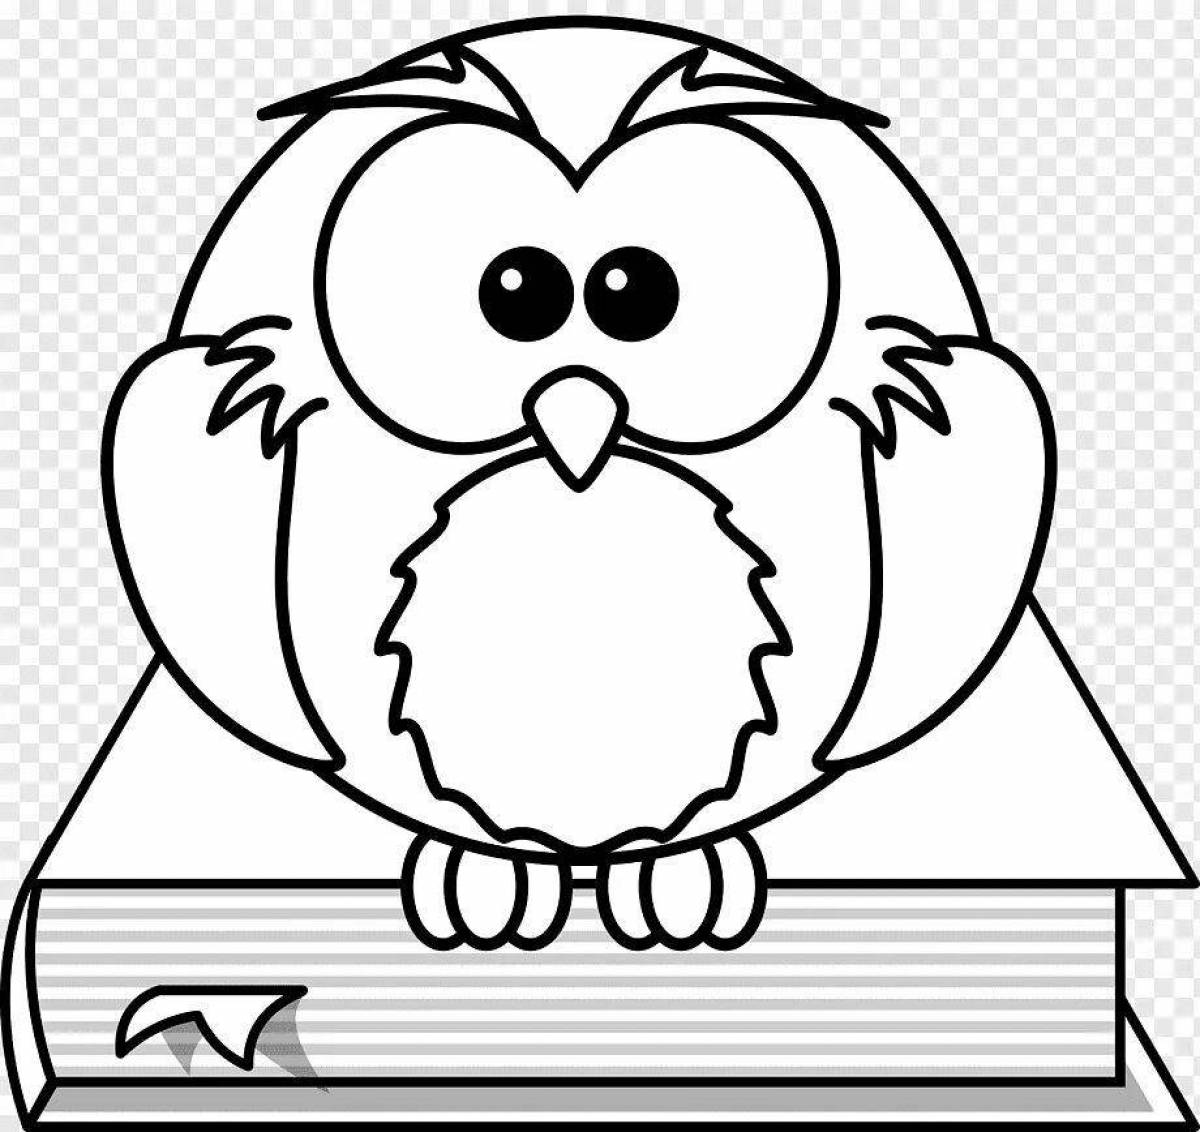 Magic wise owl coloring book for kids